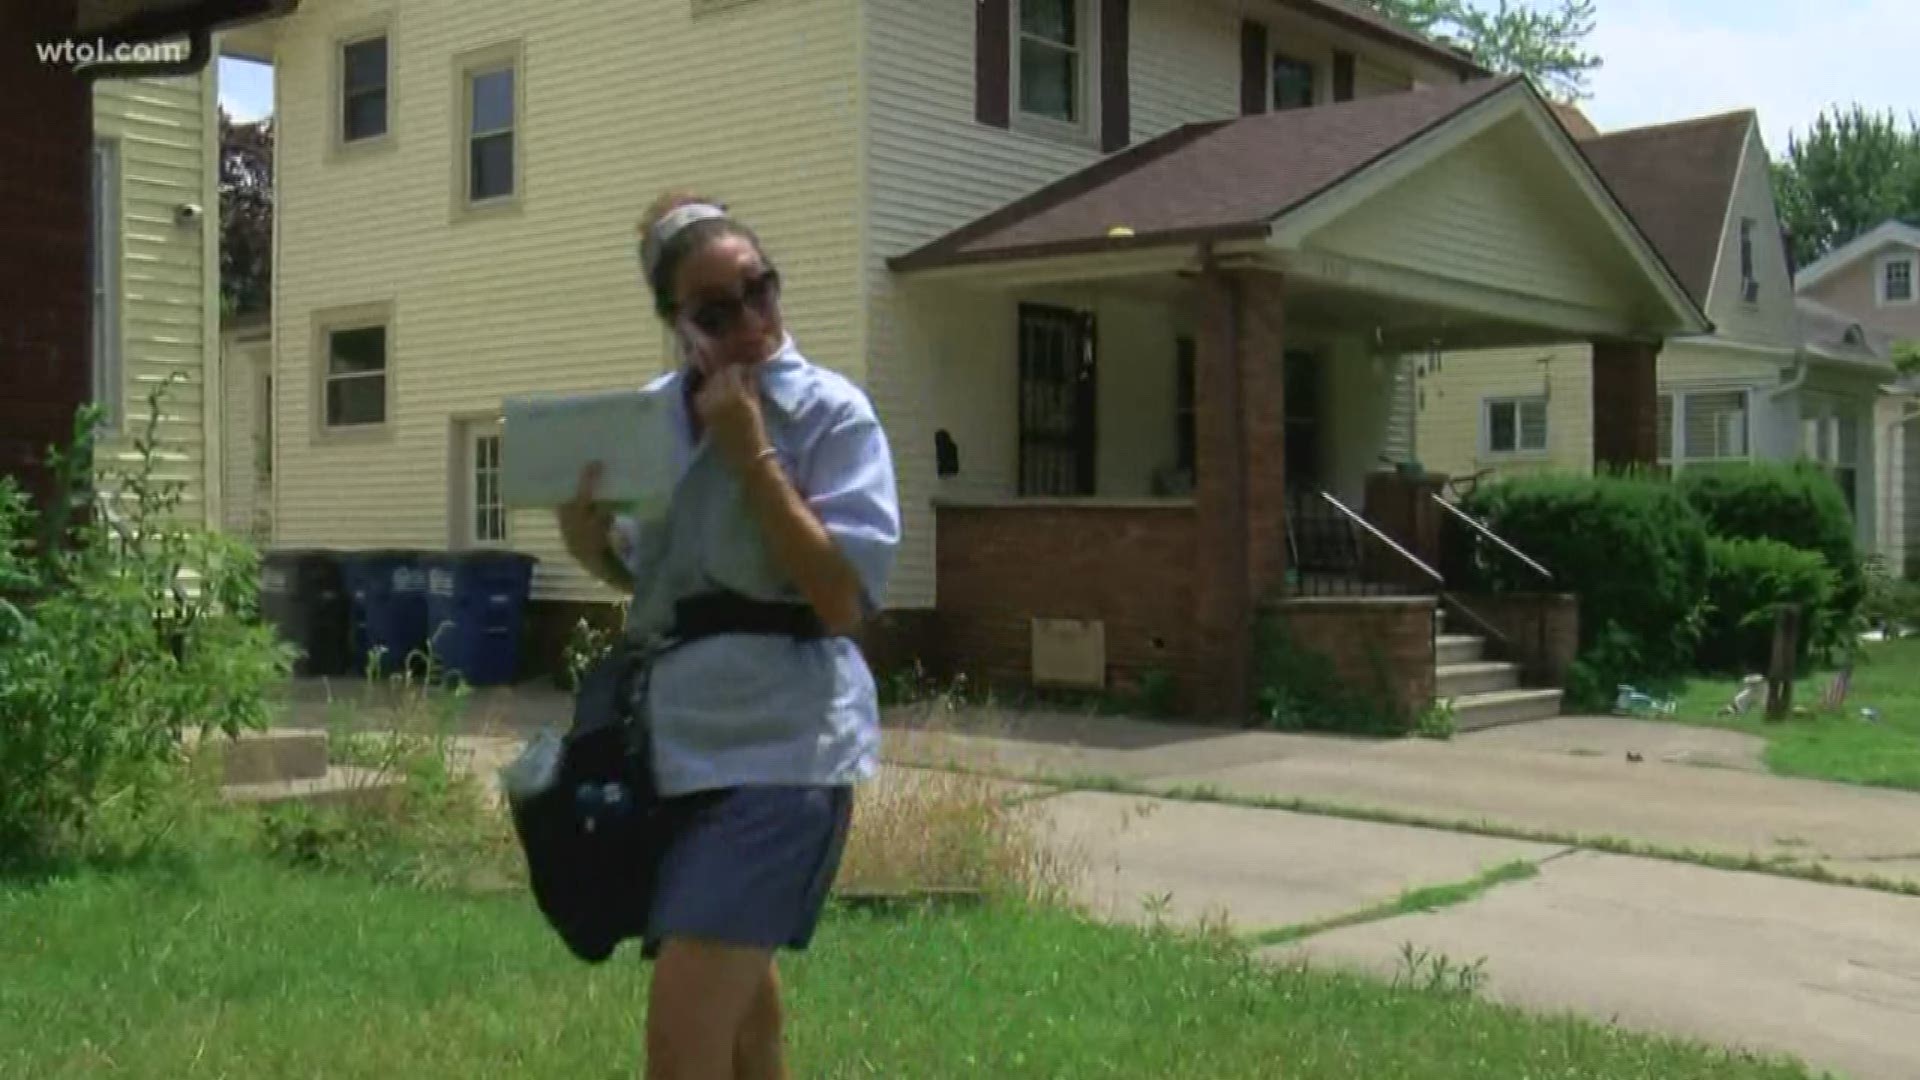 Mail carriers for the Post Office are outside daily, enduring the heat as they drop off mail.